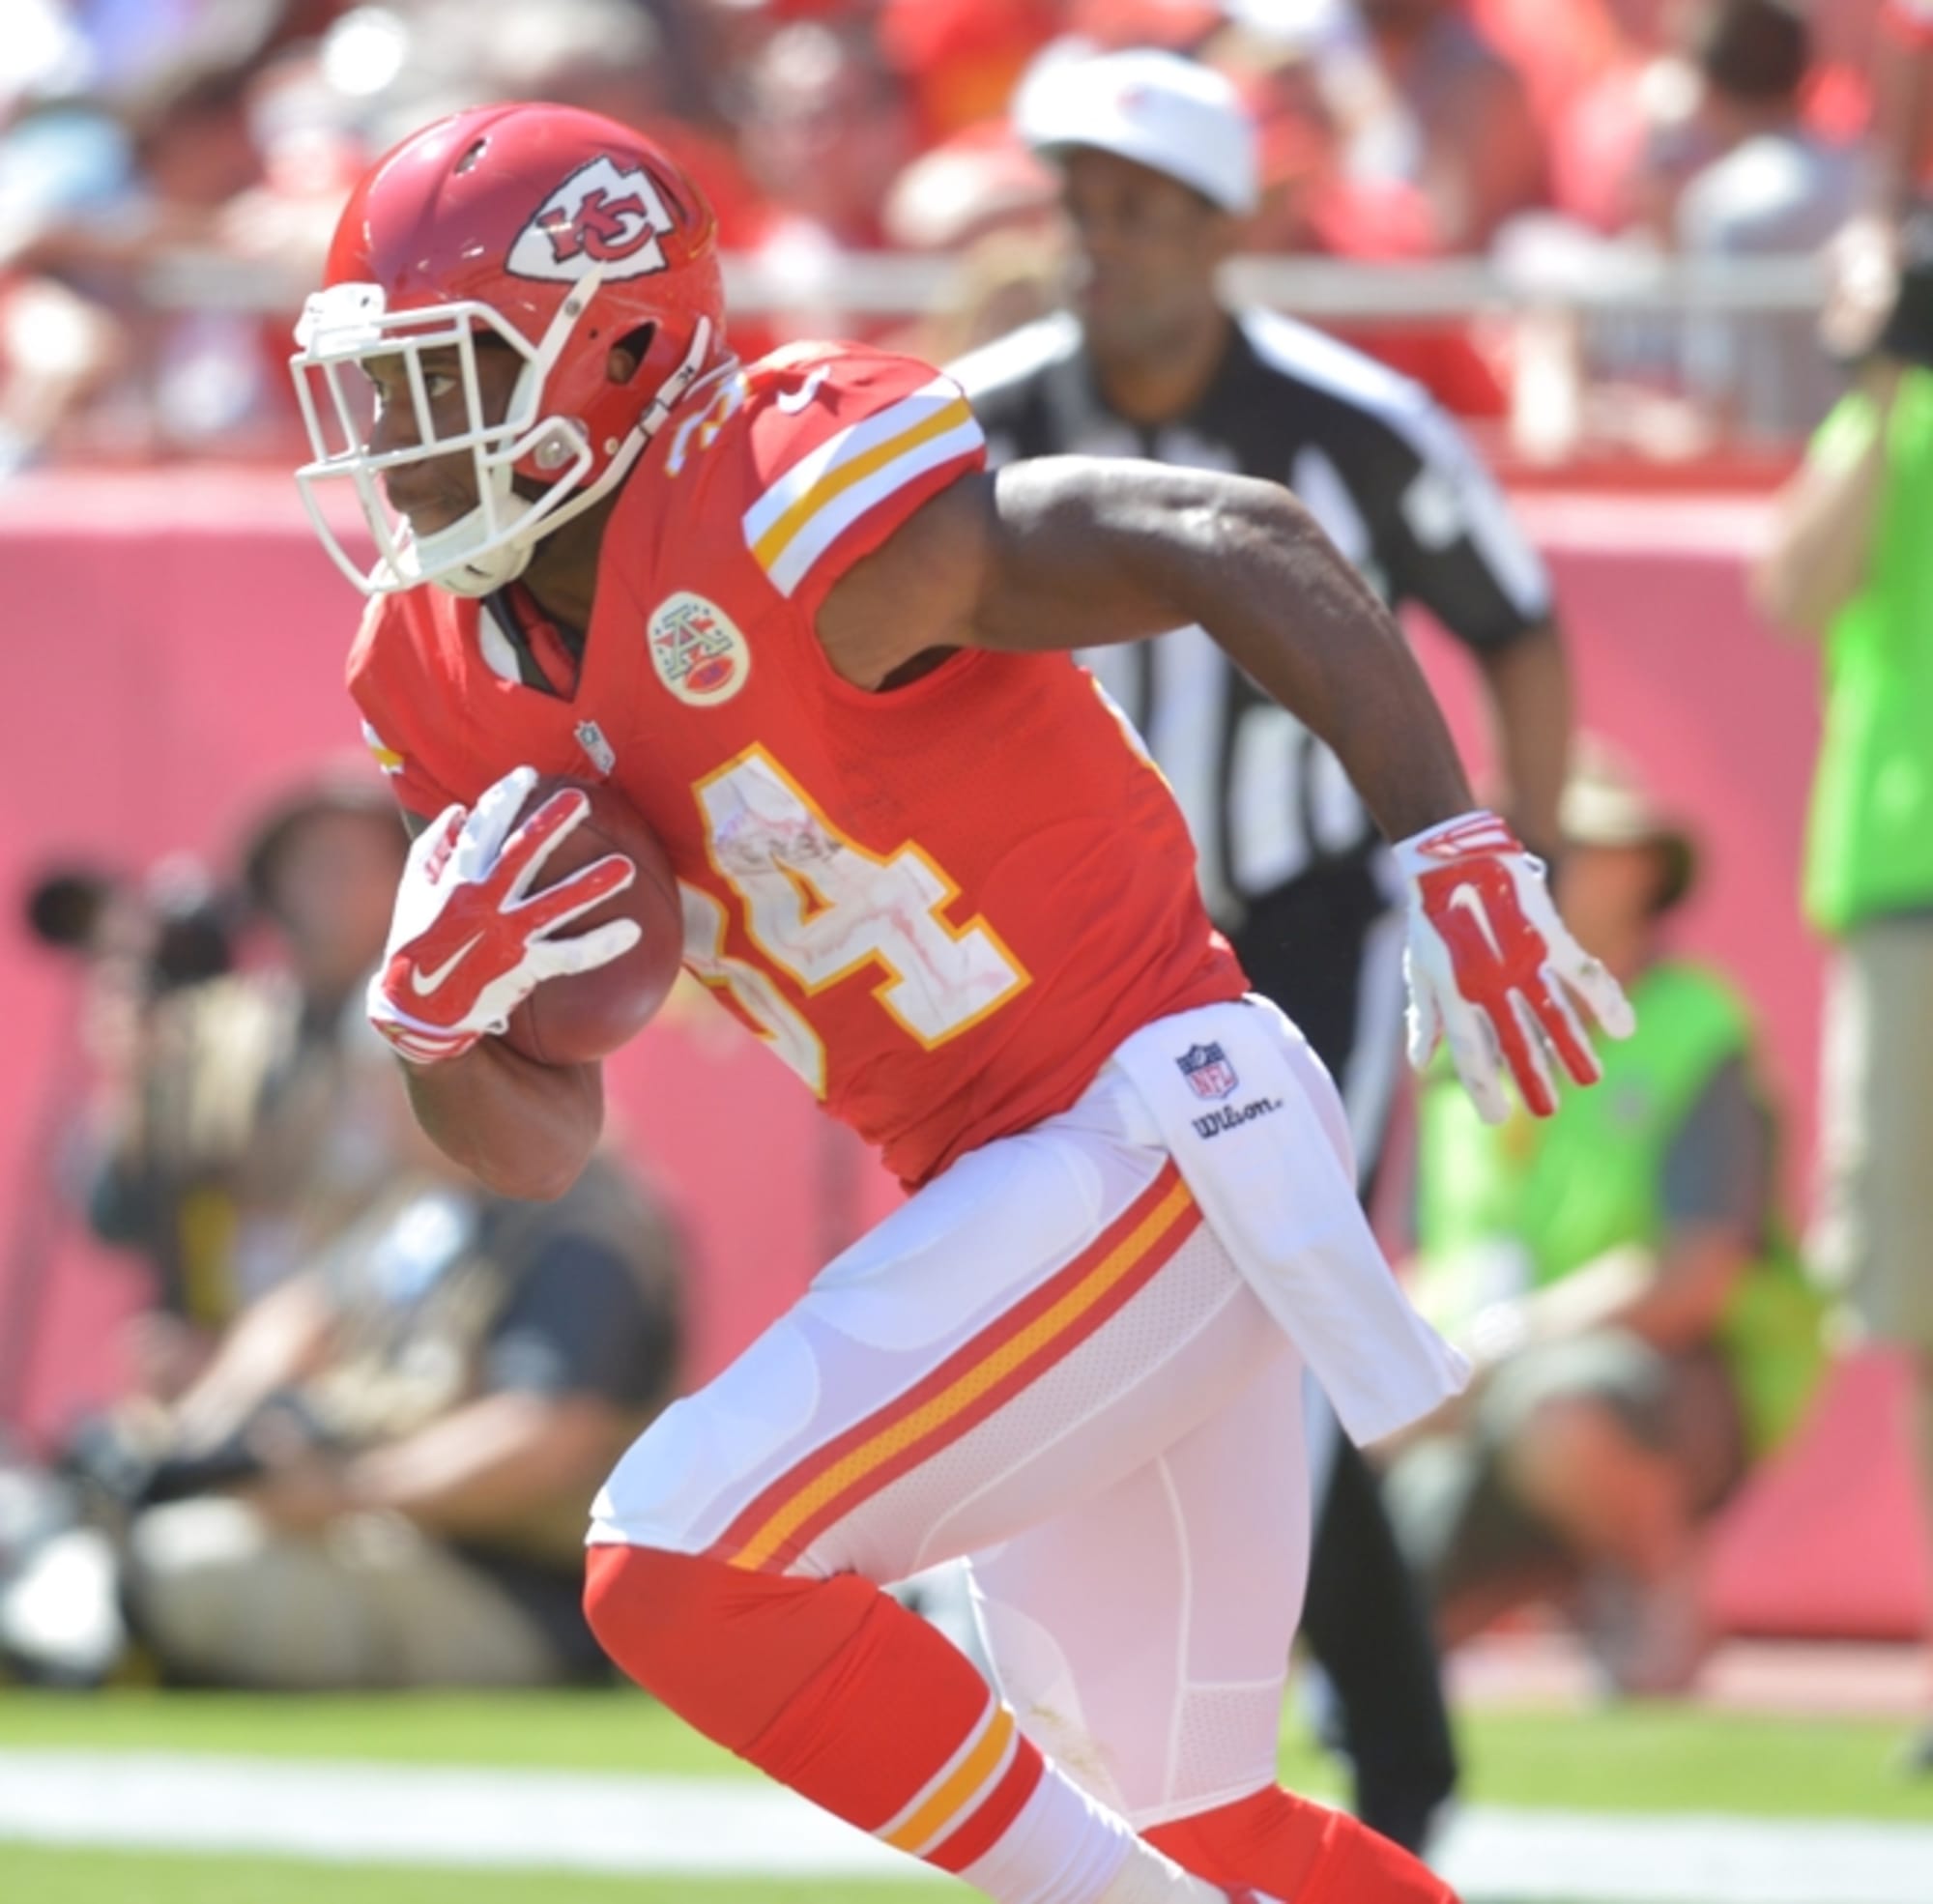 Knile Davis puts Chiefs up 7-0 over Dolphins (GIF)